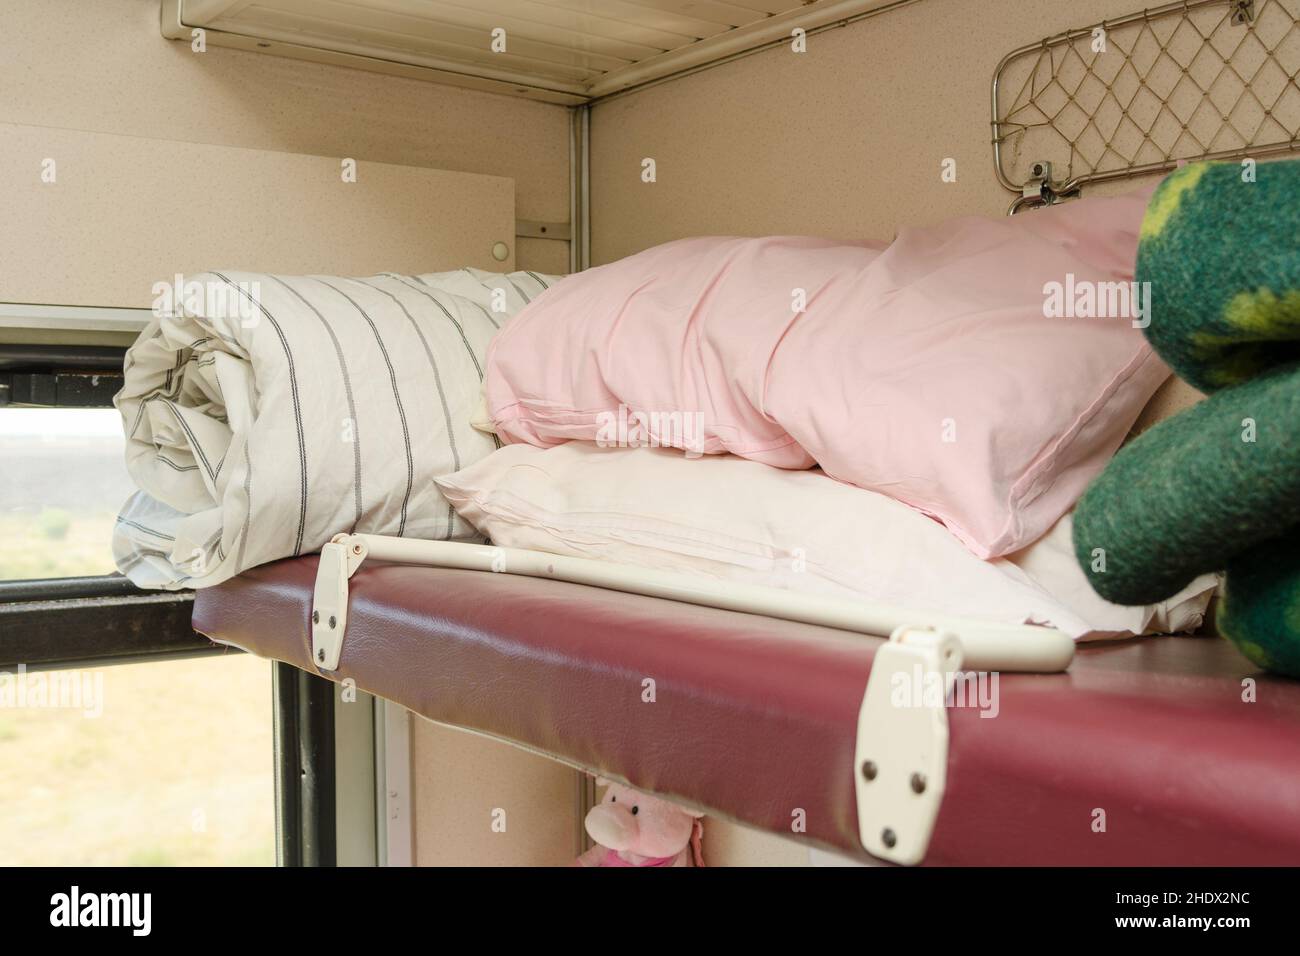 compartment, bed cover, sleeper, compartments, bed covers Stock Photo